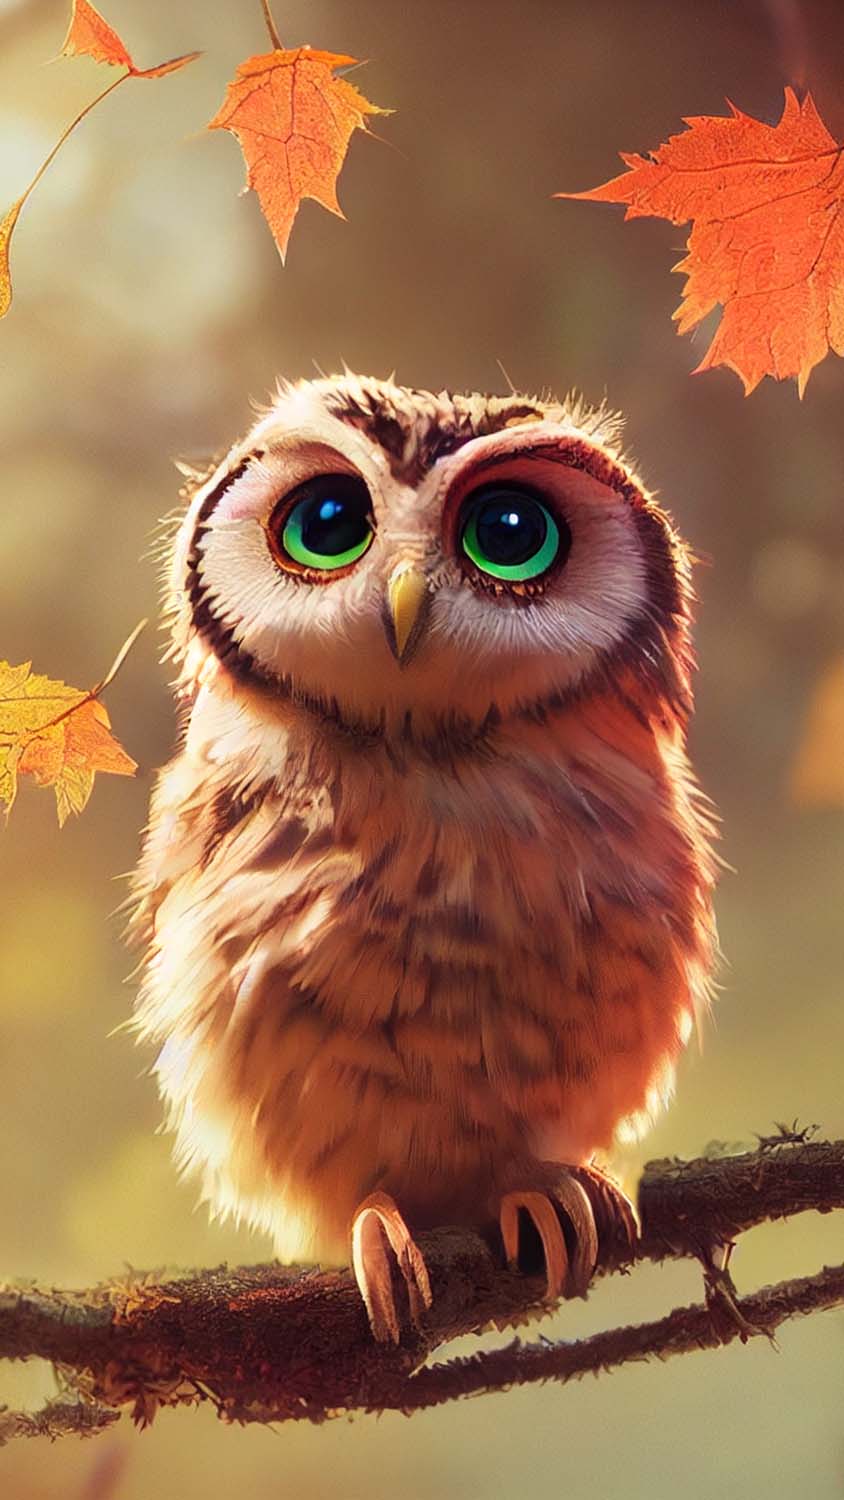 Autumn Owl IPhone Wallpaper HD - IPhone Wallpapers : iPhone Wallpapers